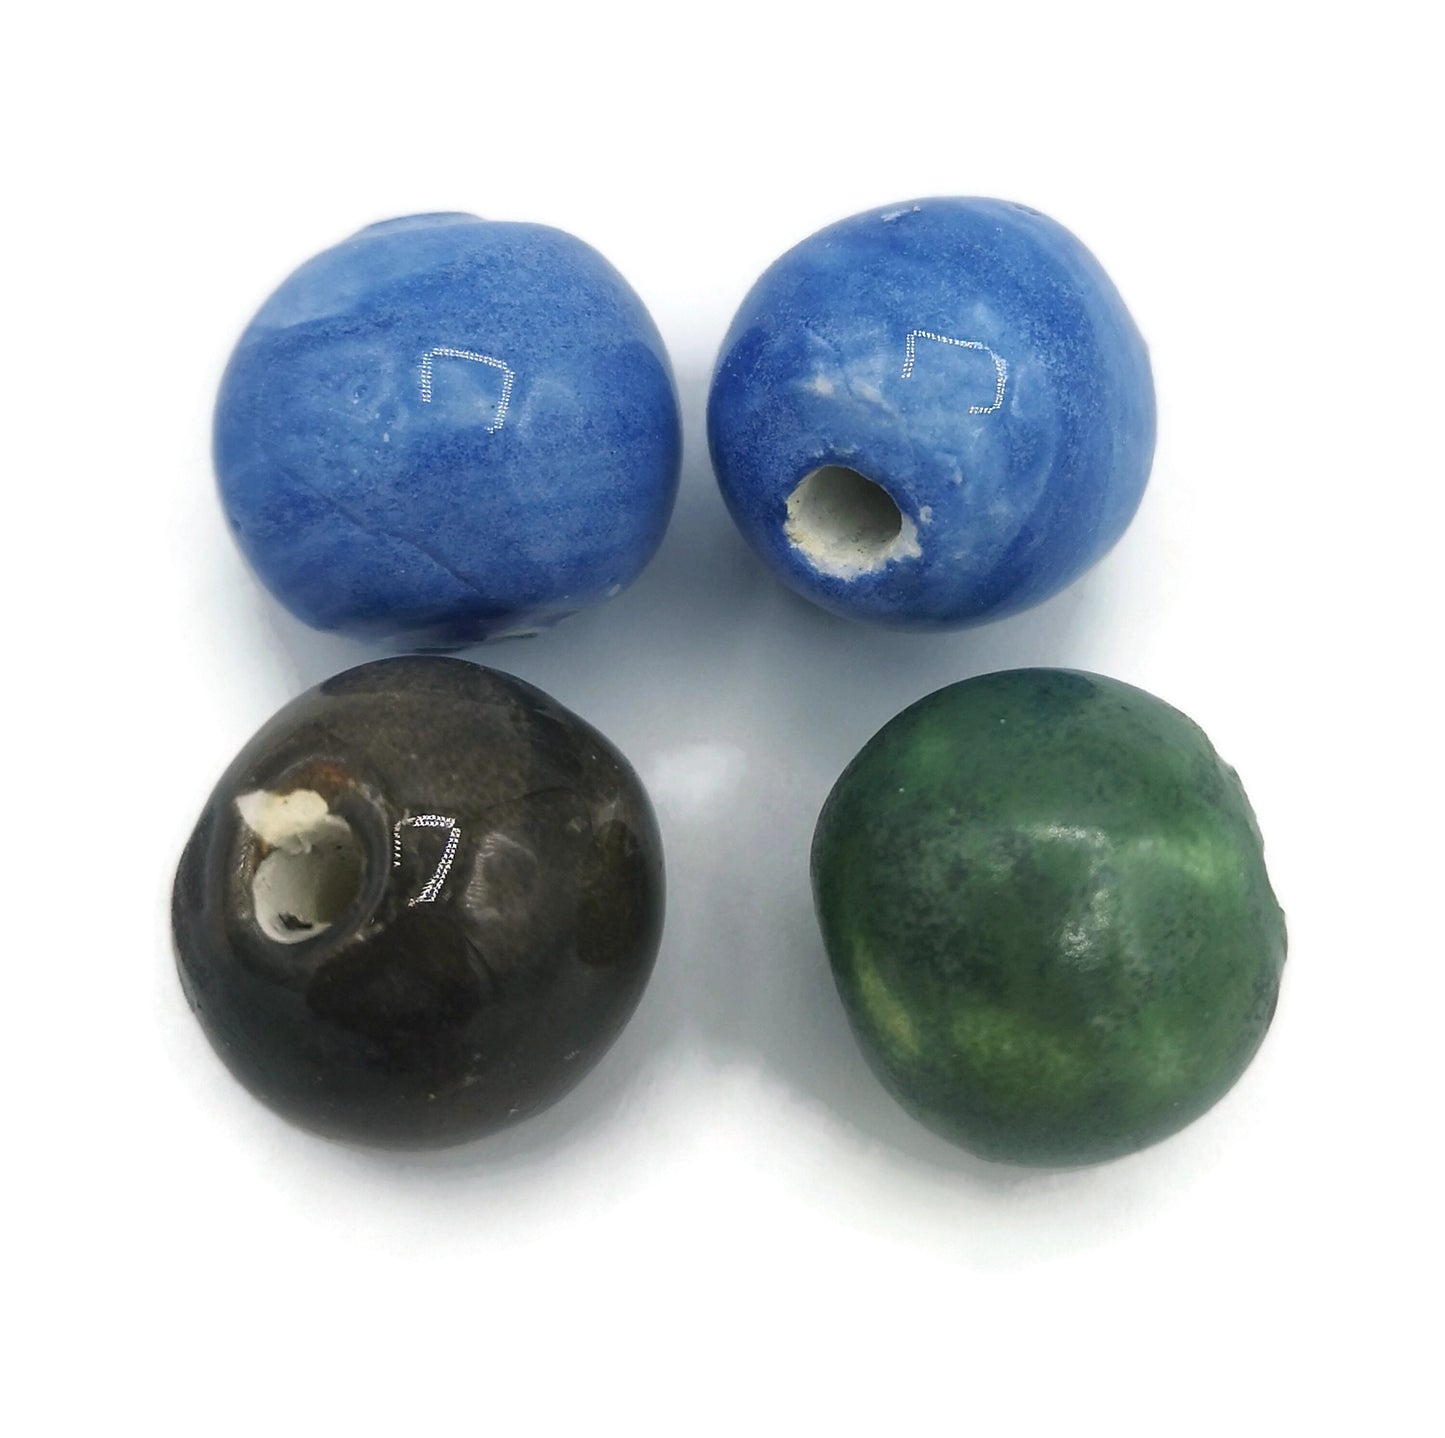 4Pcs 15mm Large Handmade Ceramic Beads For Jewelry making, Unique Bubblegum Beads, Clay Craft Beads Decorative, Mixed Round Colorful Beads - Ceramica Ana Rafael